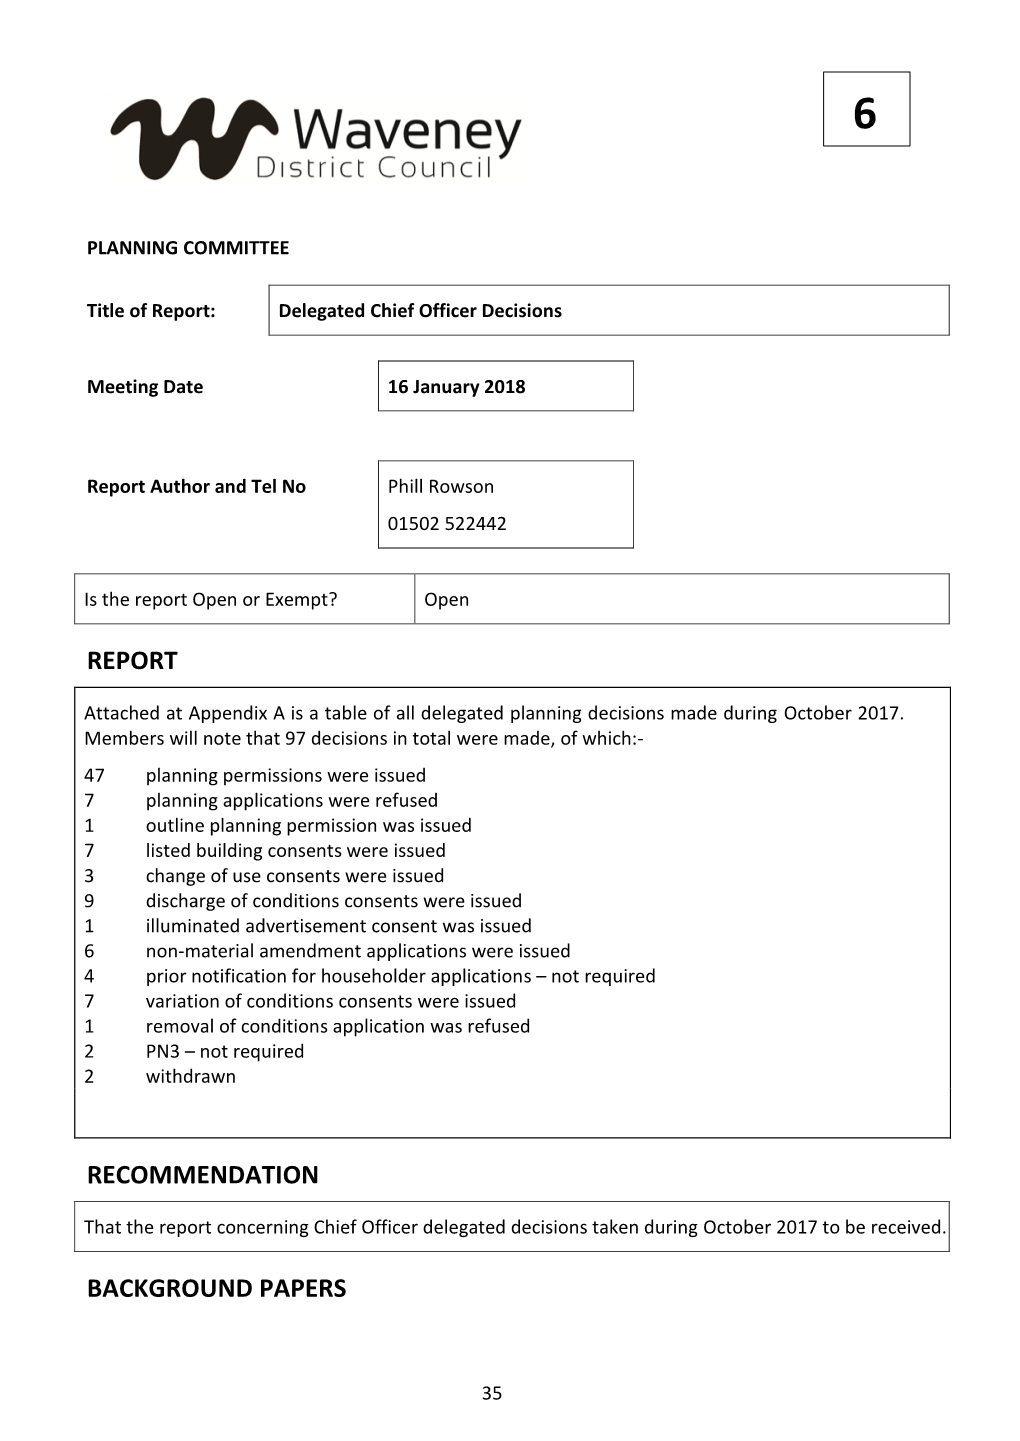 Report Recommendation Background Papers